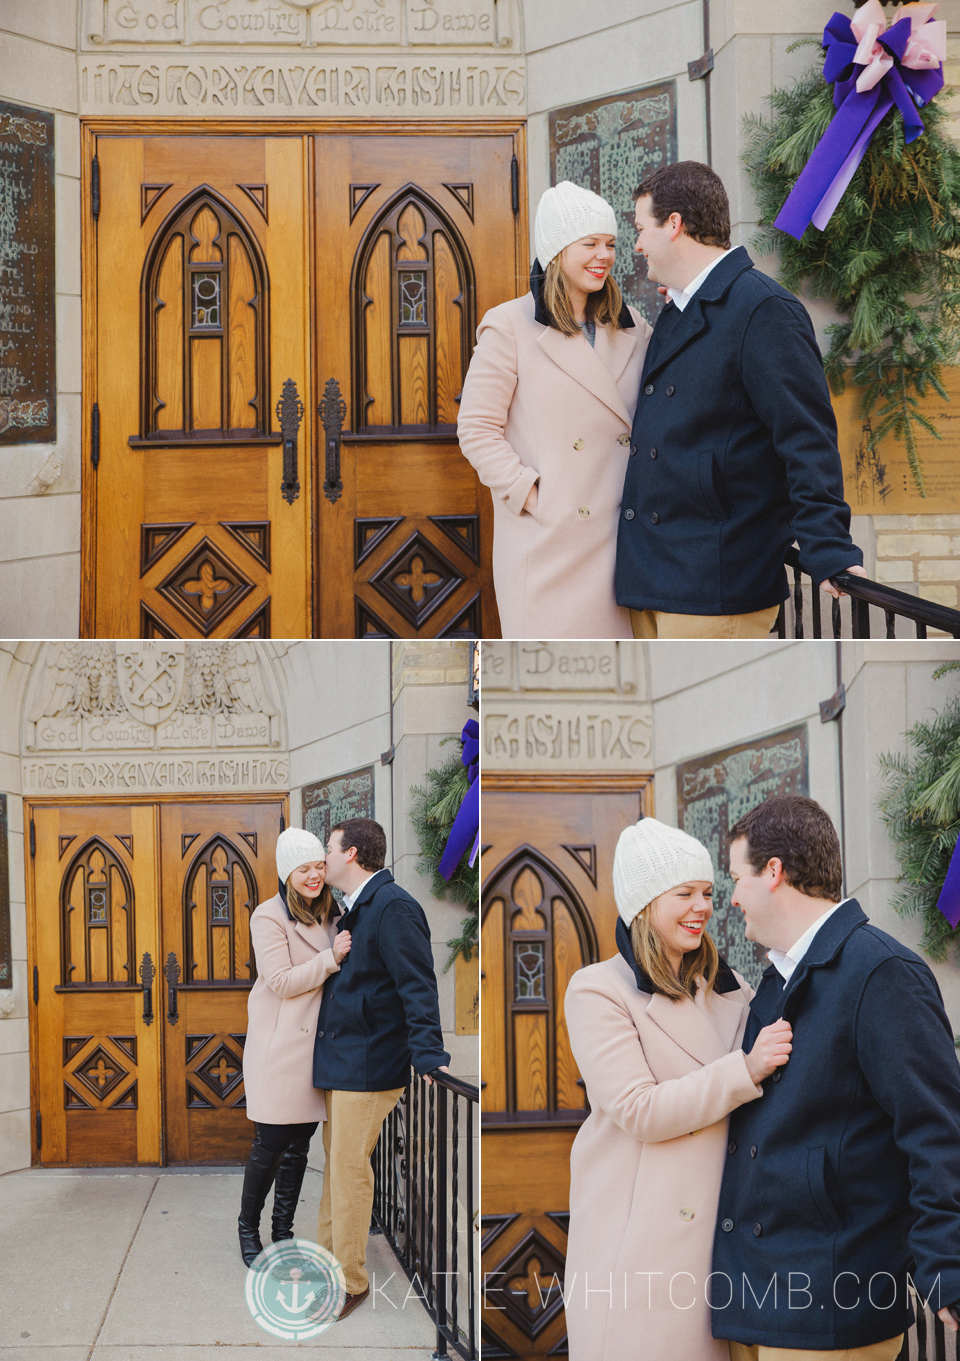 Notre Dame winter engagement session at God Country Door